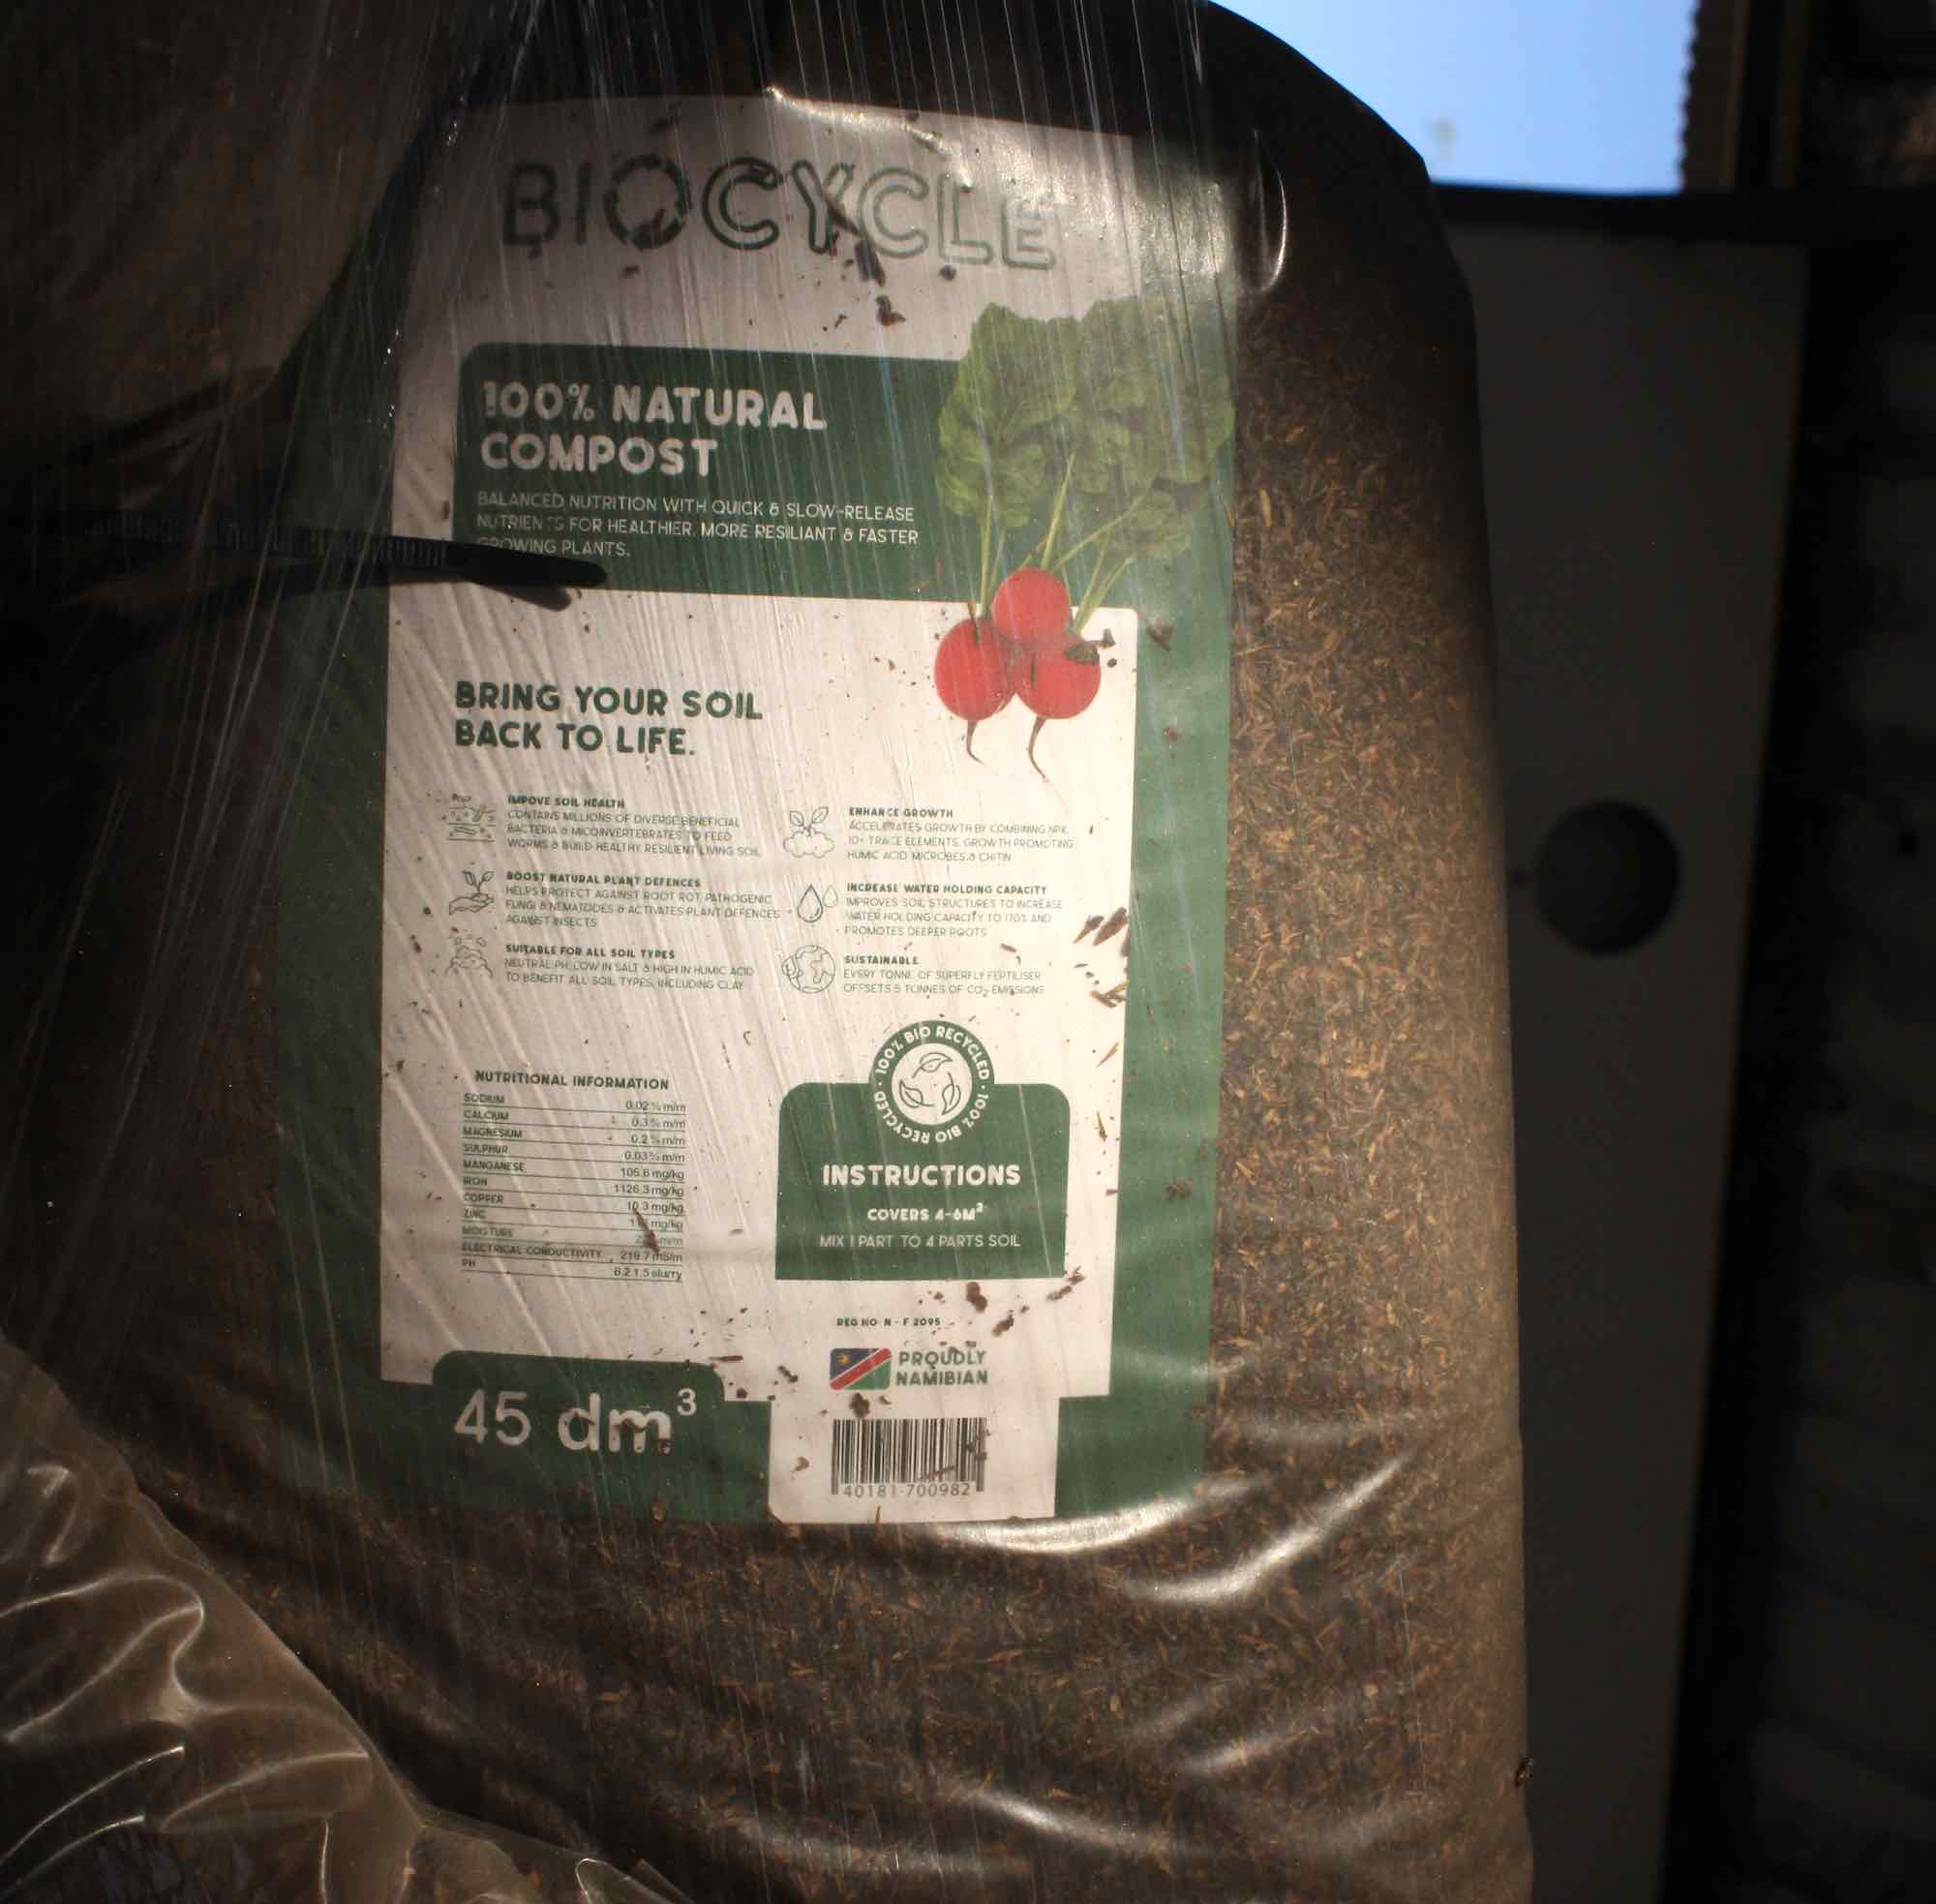 A clear sack containing the Biocycle compost.